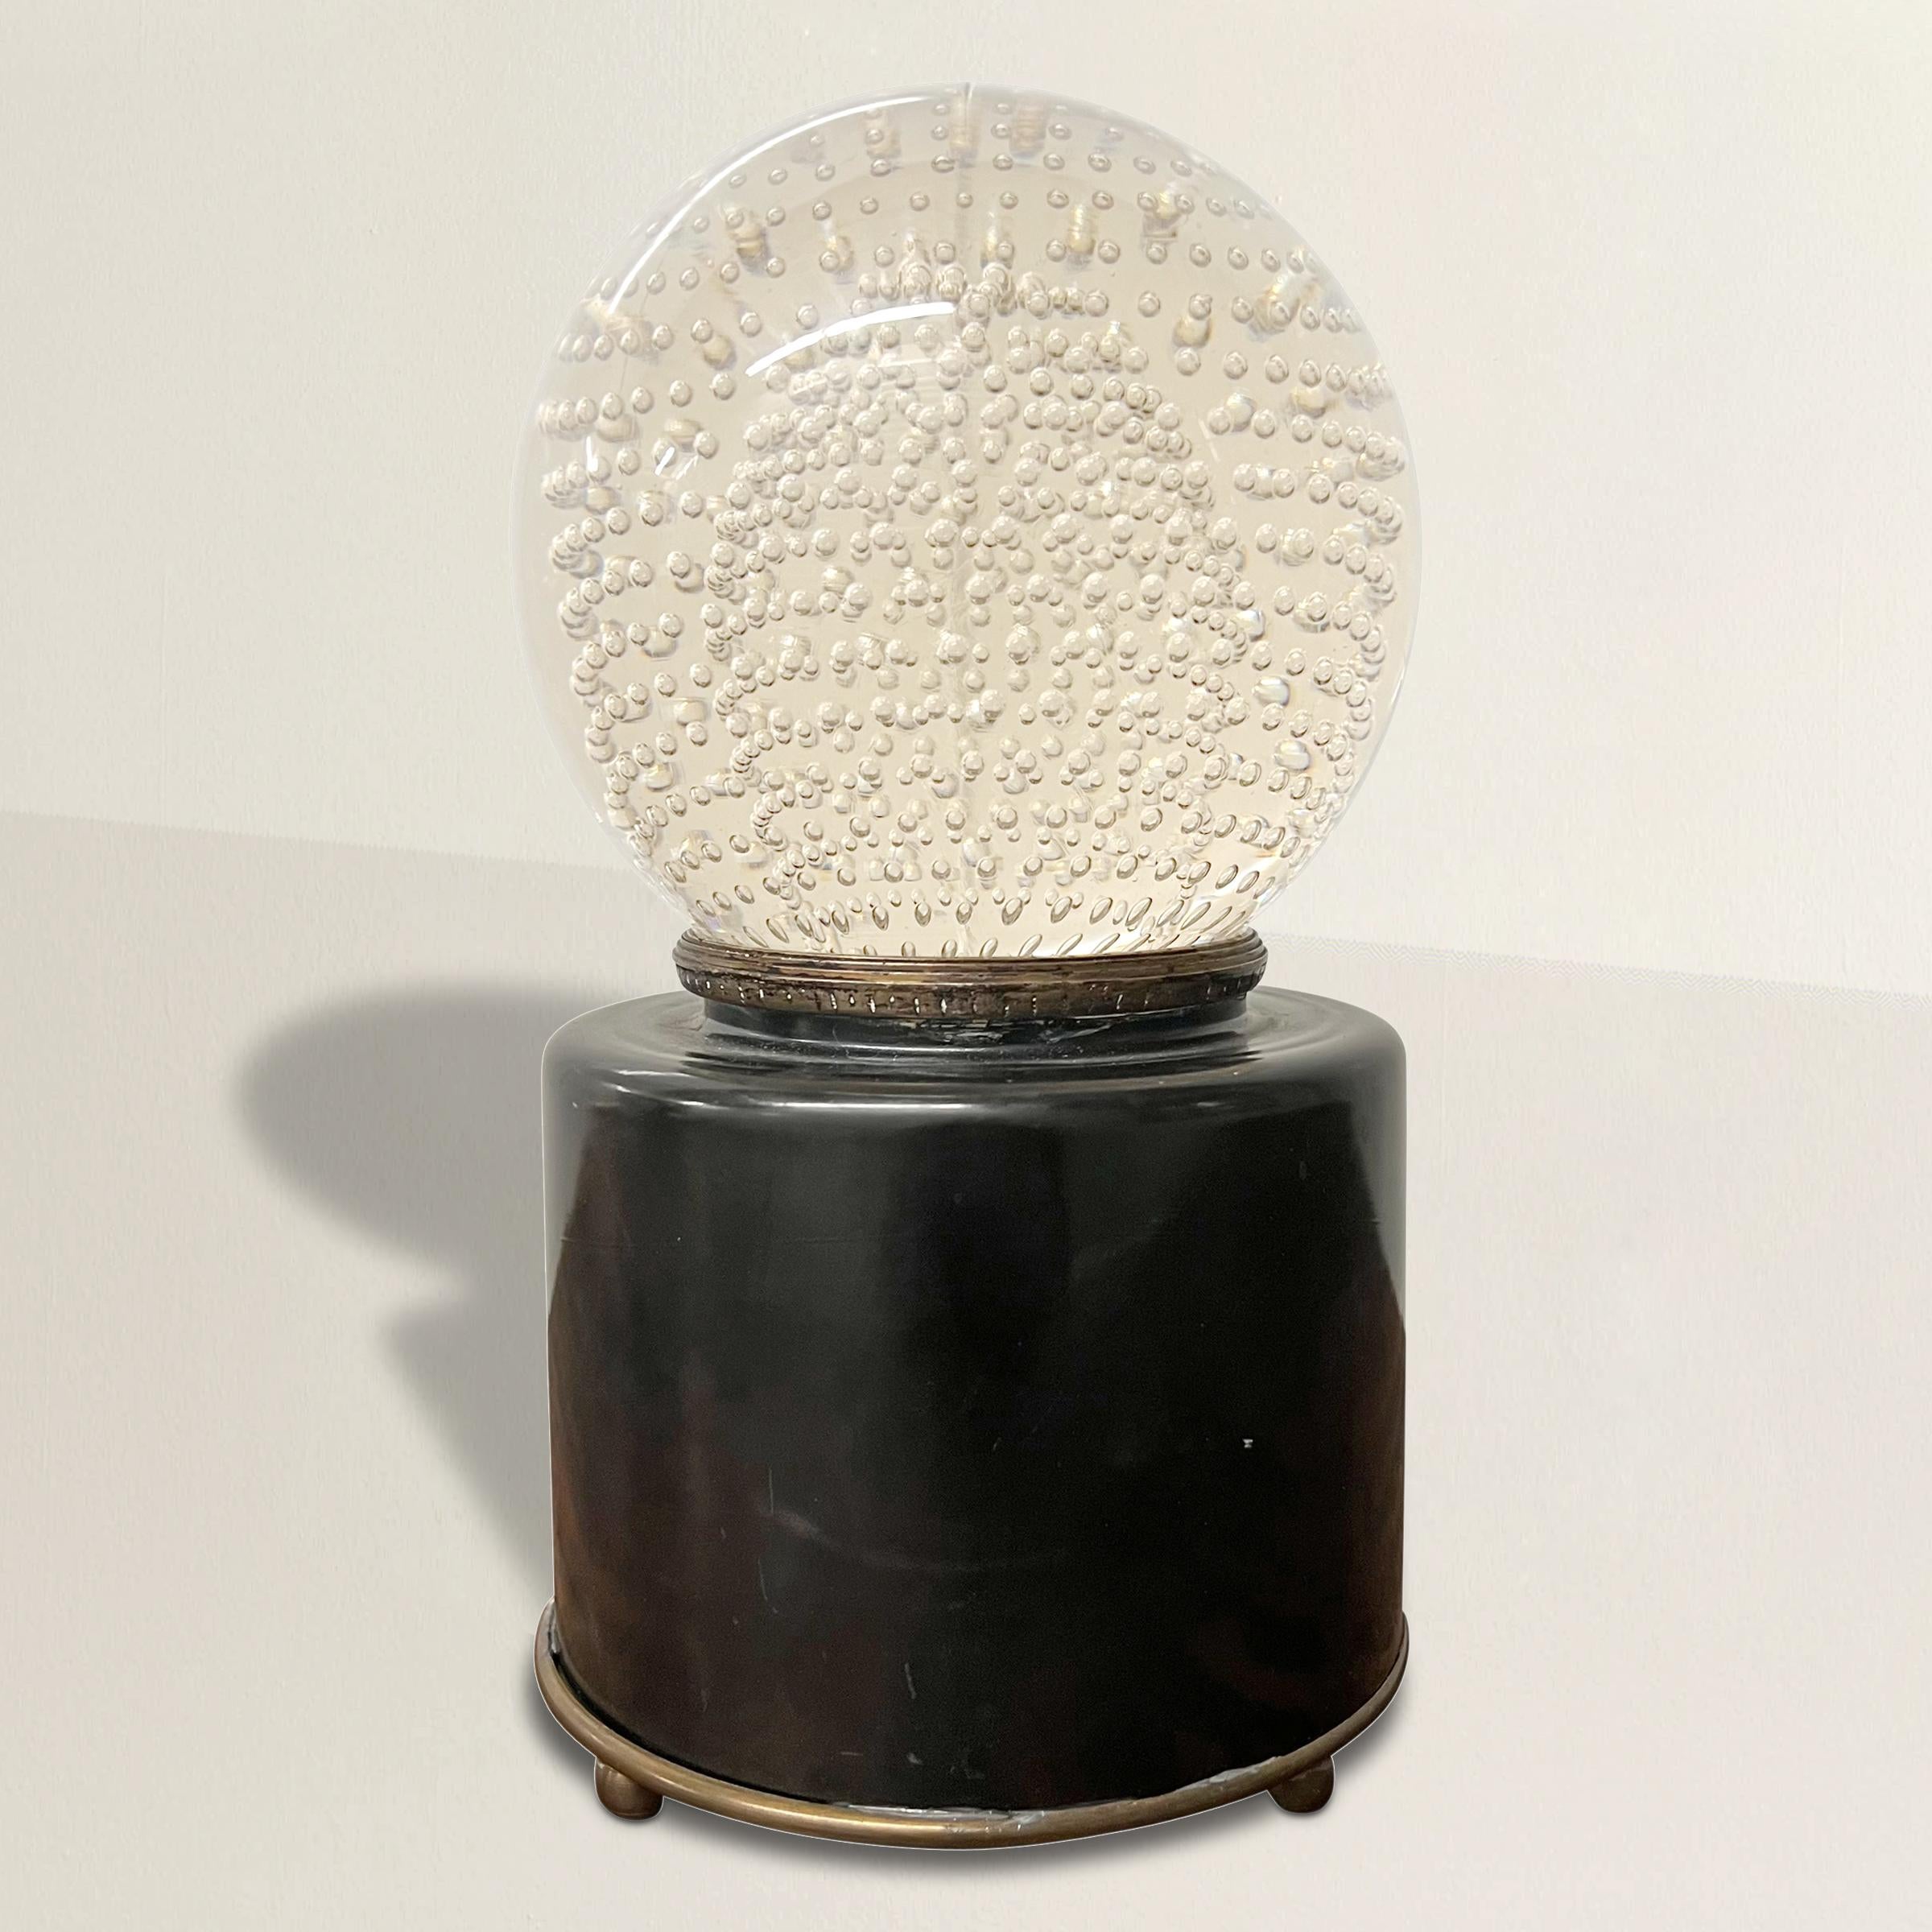 A chic and brilliant early 20th century American Art Deco table lamp with a hand-blown glass globe shade with captured bubbles, and a glass body with a brass base. Newly wired for US.